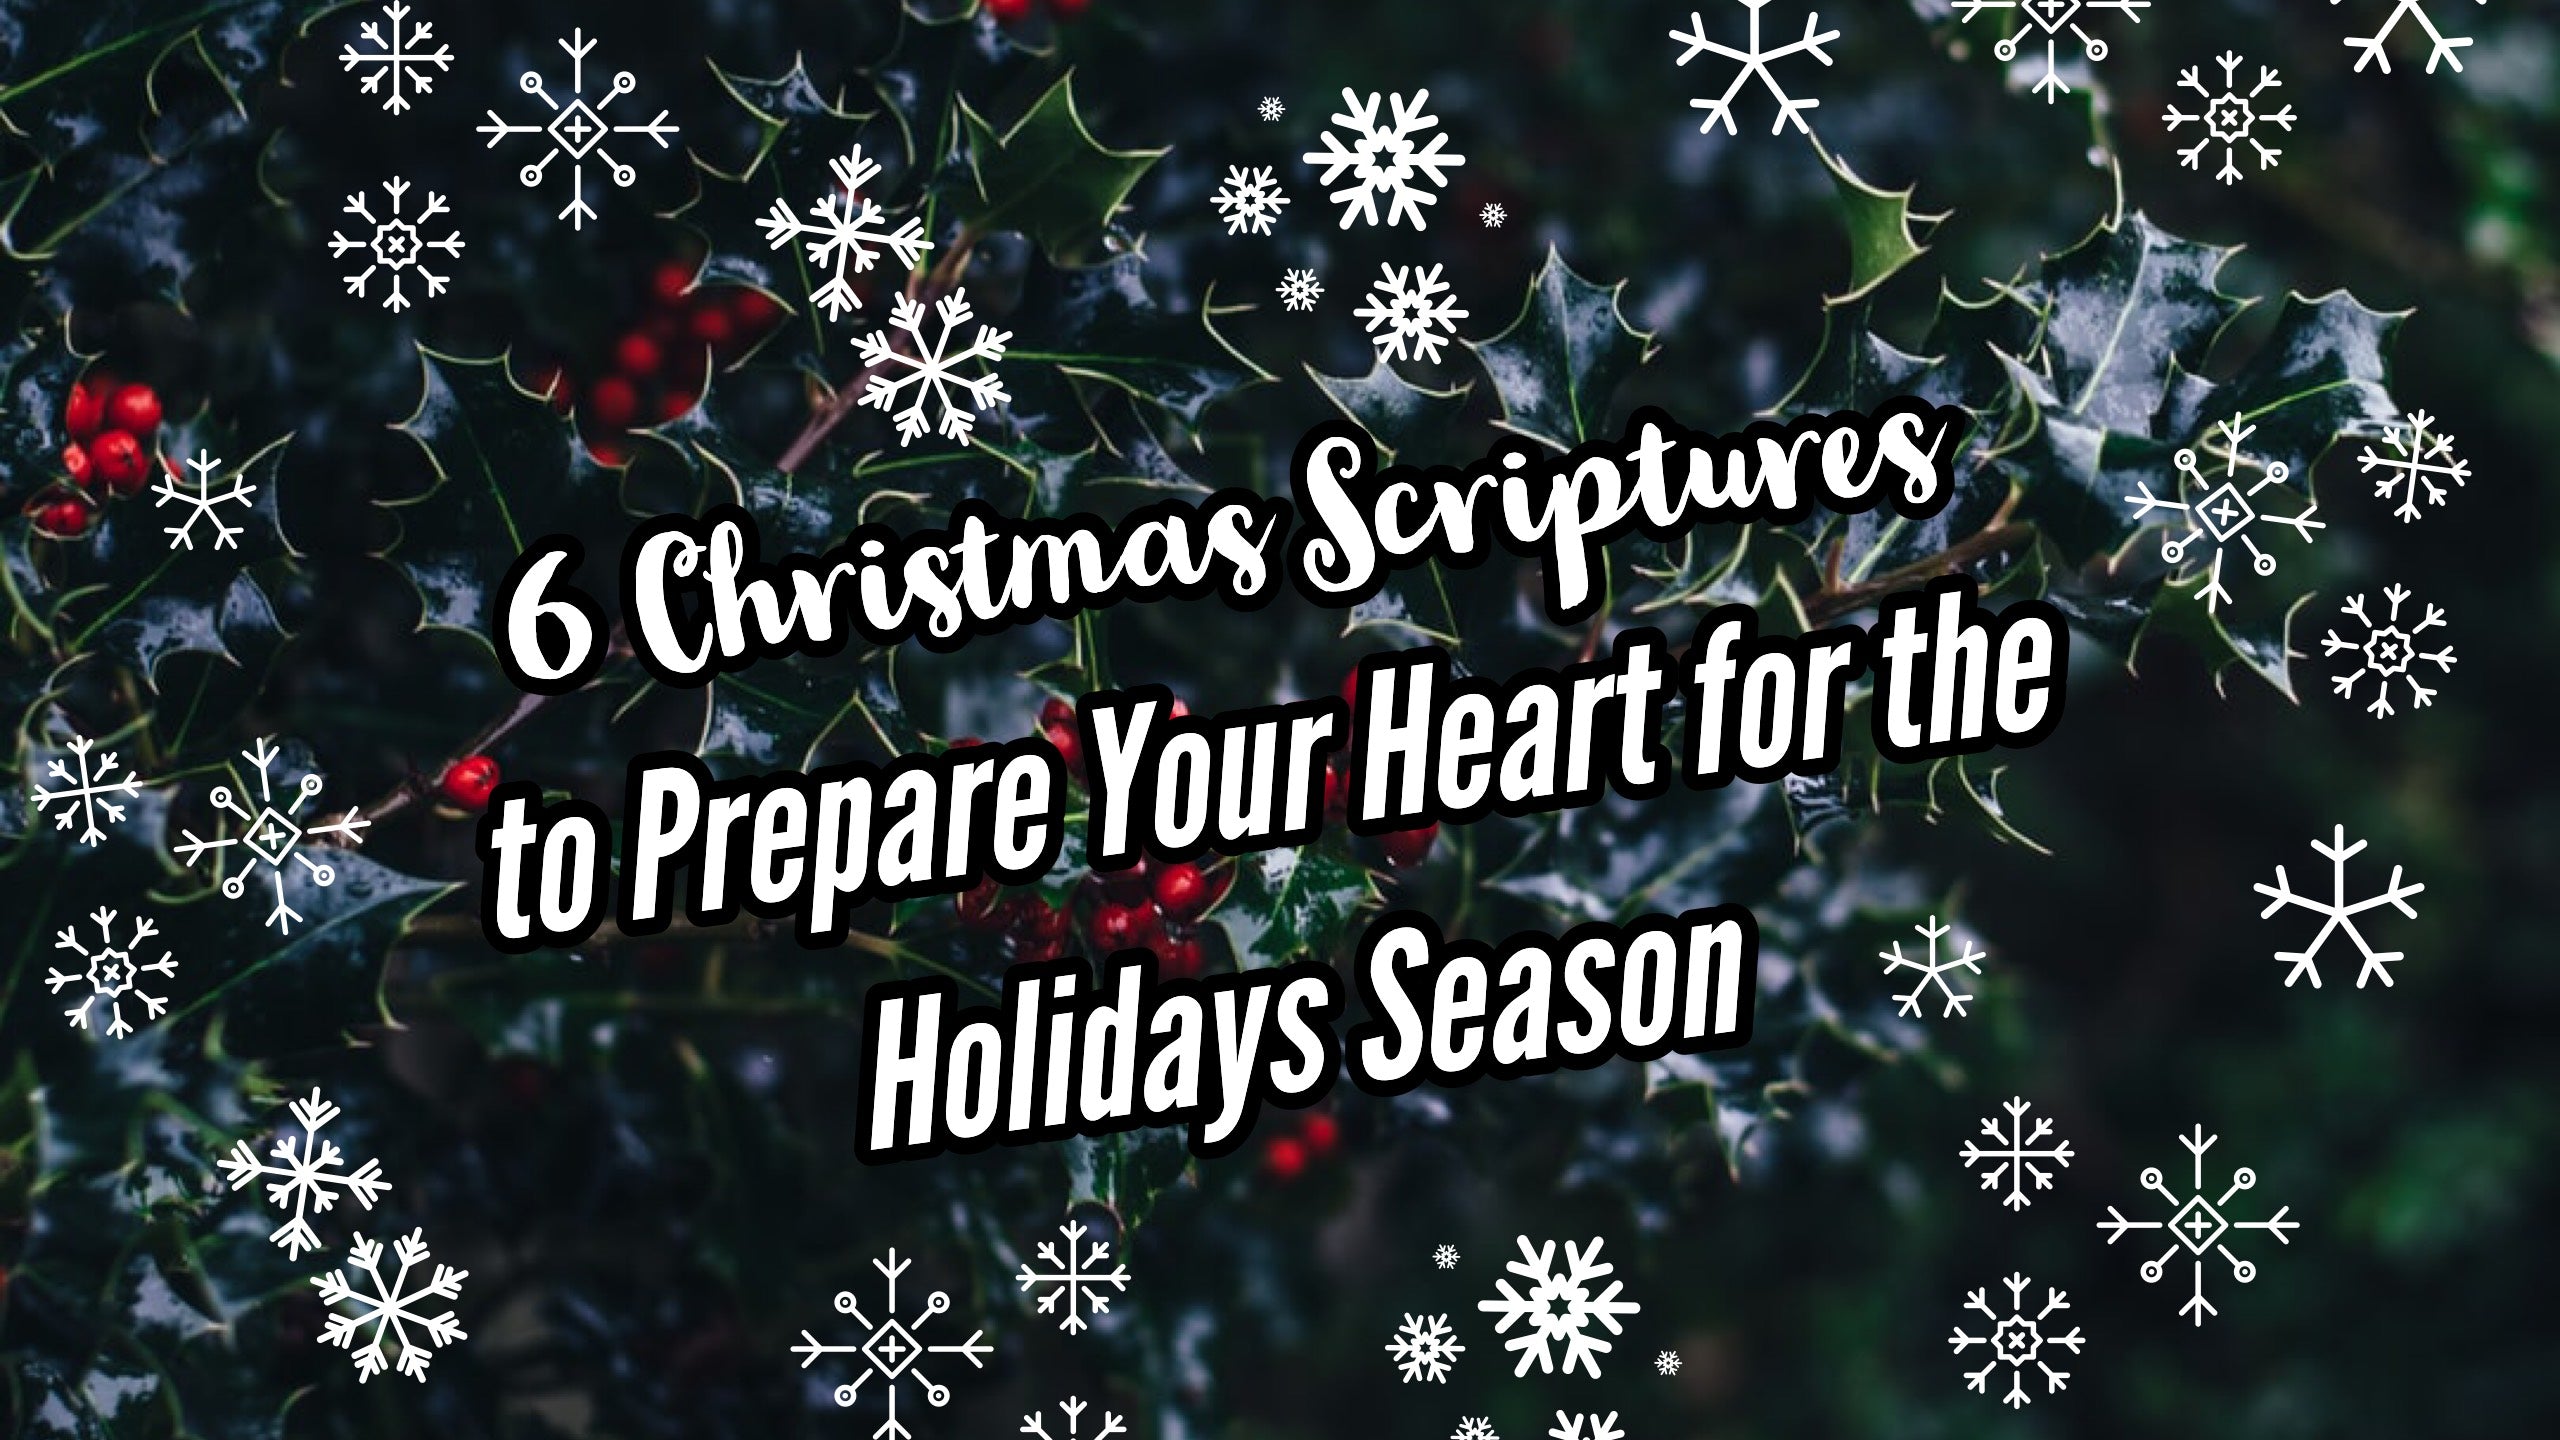 6 Christmas Scriptures to Prepare Your Heart for the Holidays Season